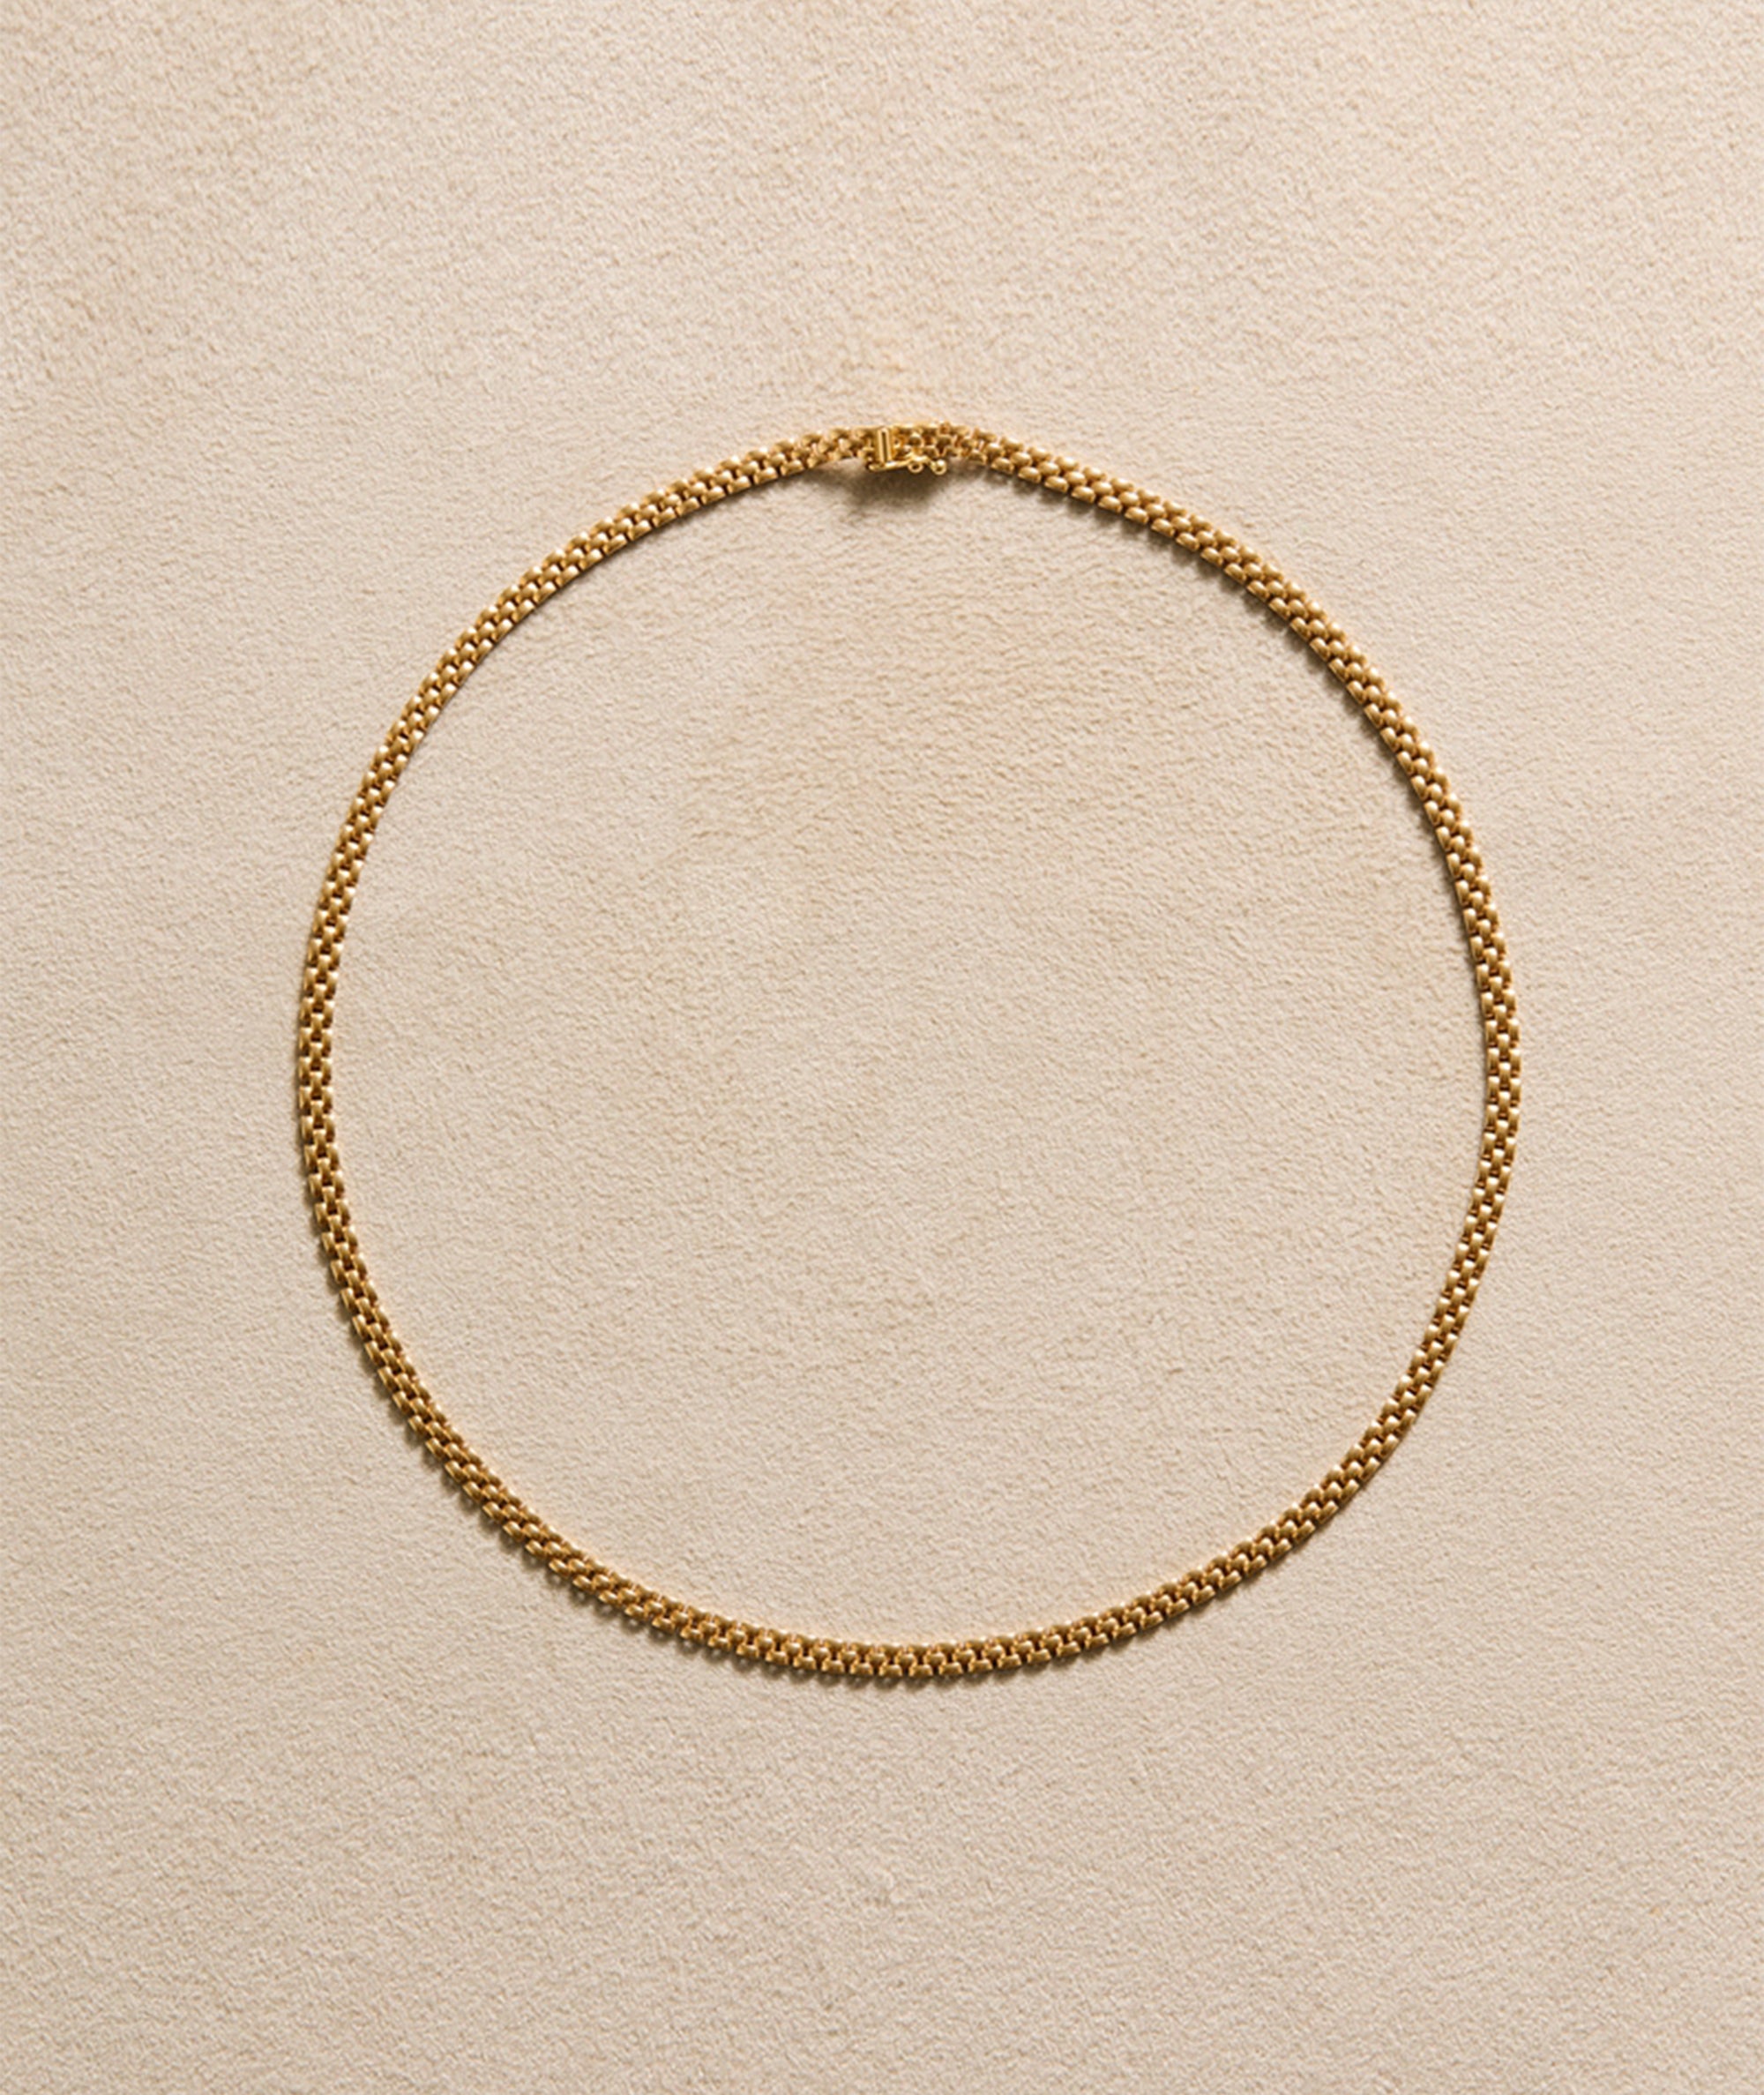 Vintage chain necklace in yellow gold. Exclusively sourced for EREDE Curated.